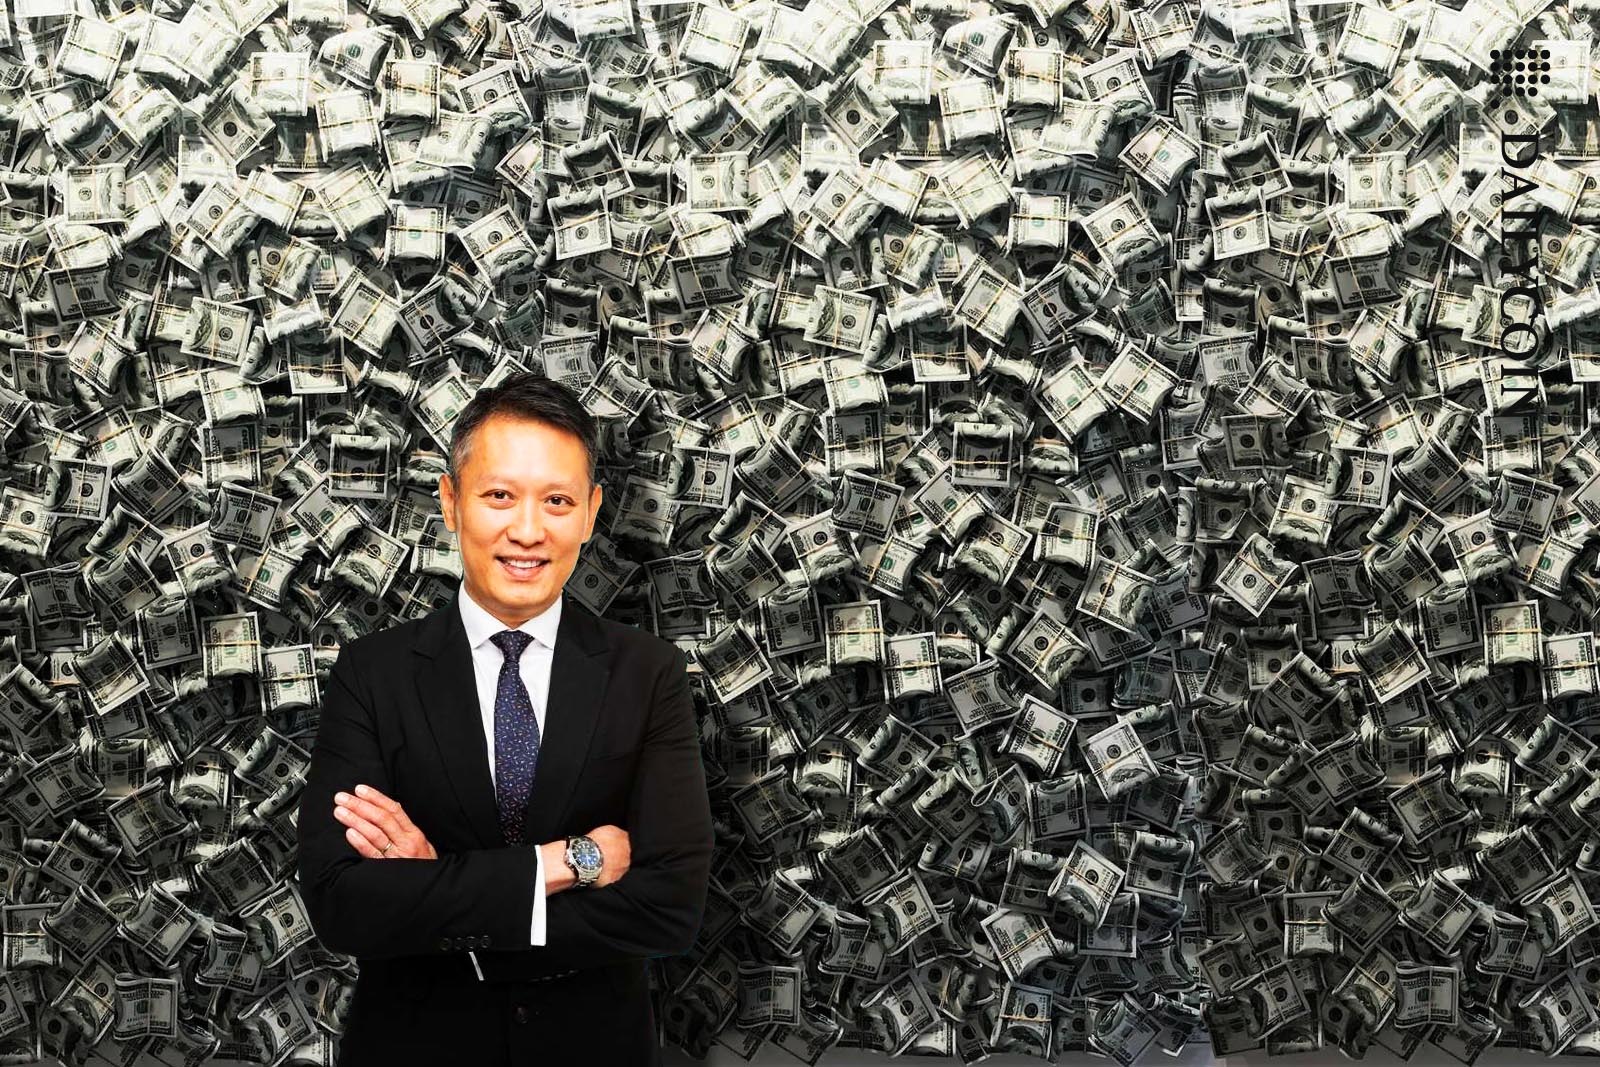 Richard Teng of Binance posing in front of a wall of cash.